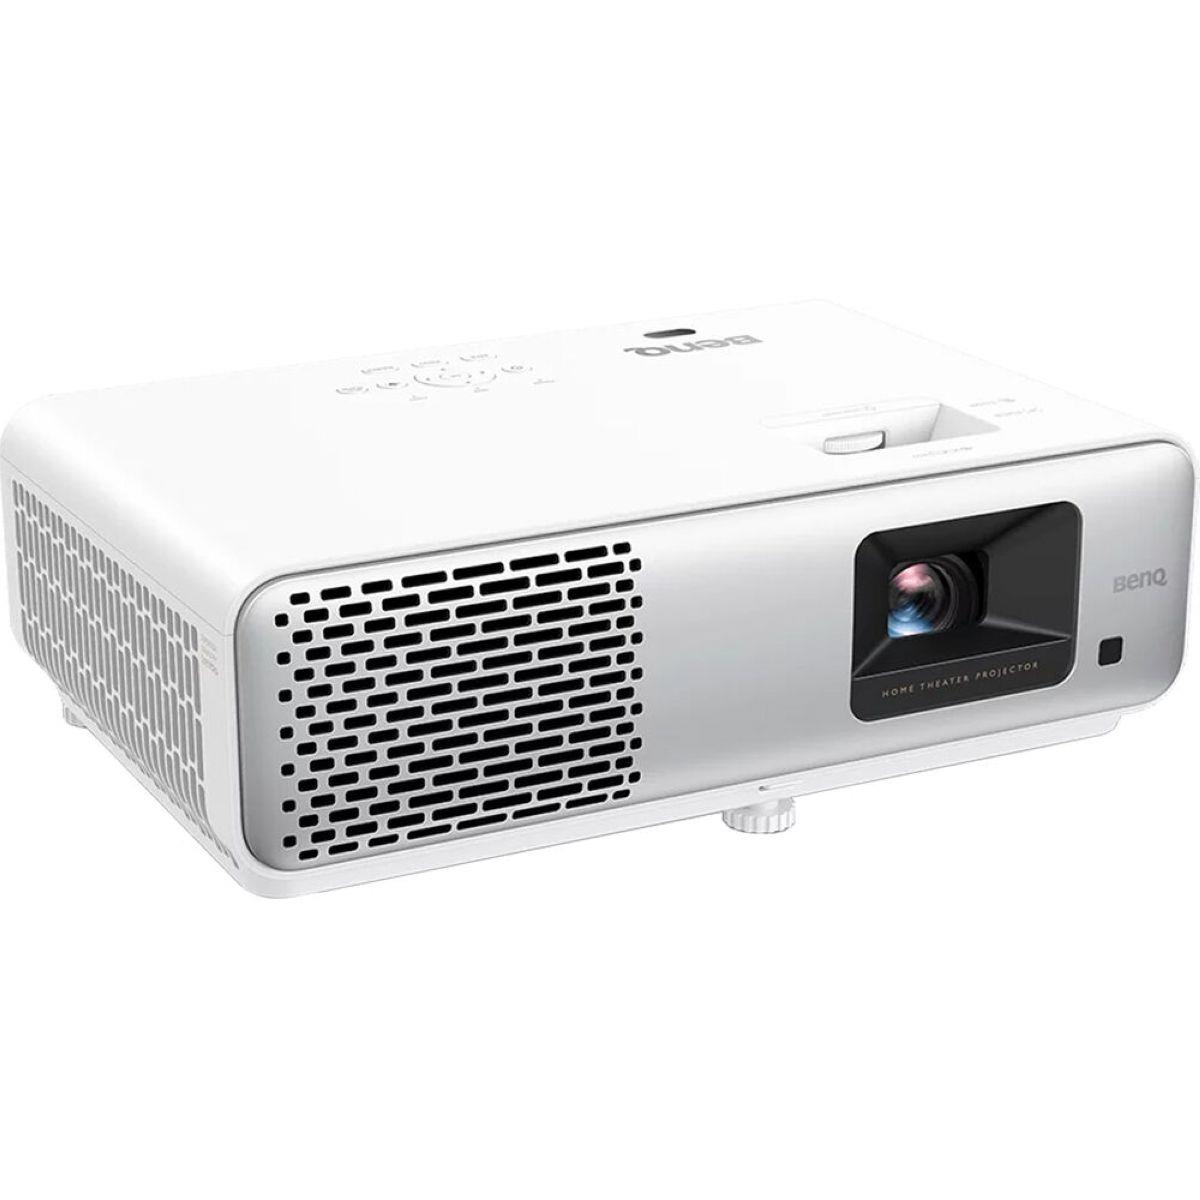 Full HD HDR LED DLP Home Theater Projector - BenQ HT2060